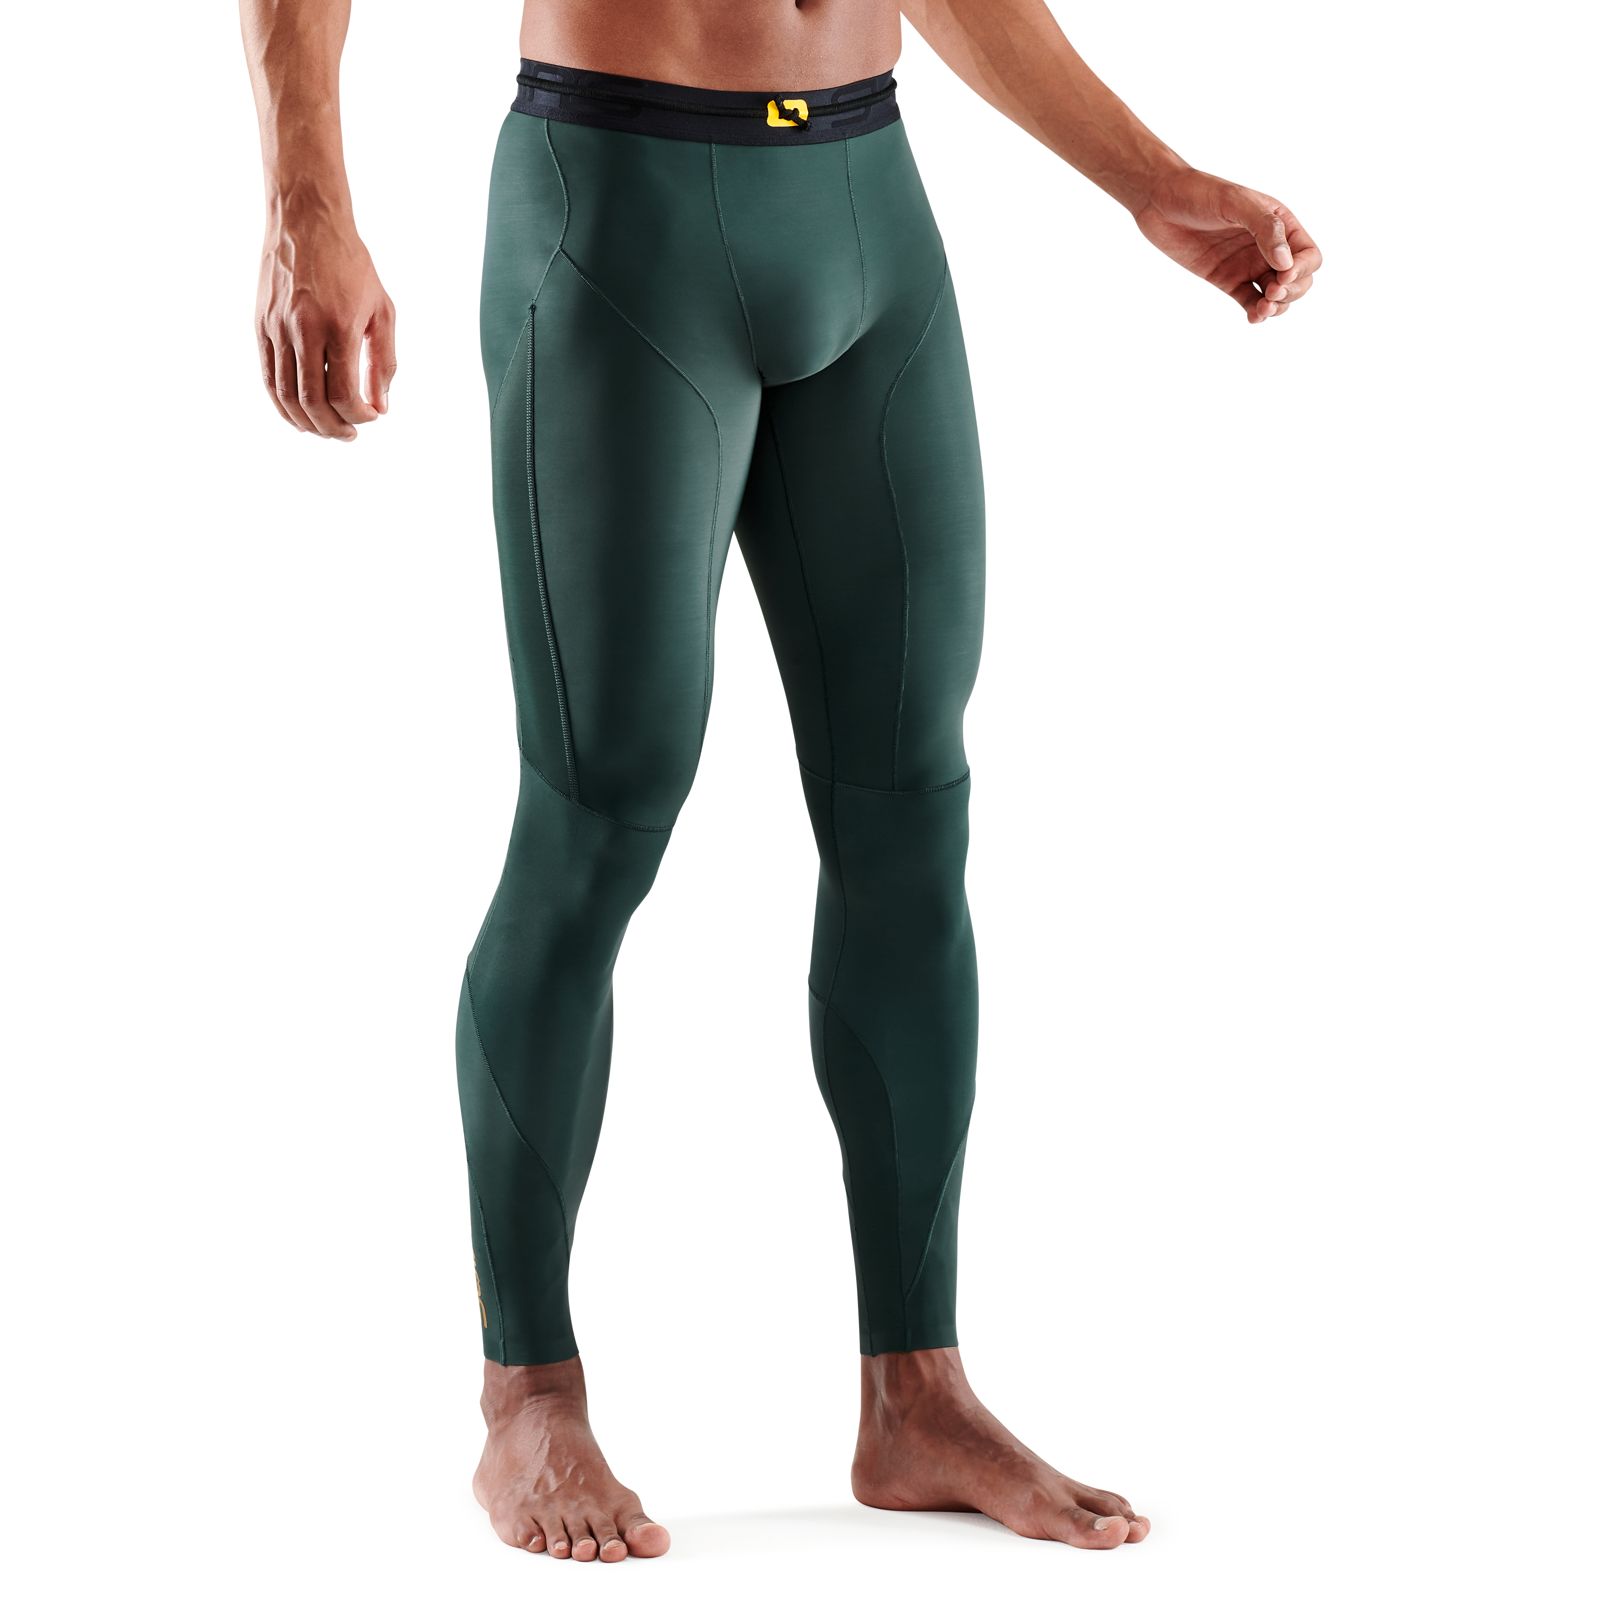 SKINS SERIES-5 MEN'S LONG TIGHTS FOREST GREEN - SKINS Compression USA